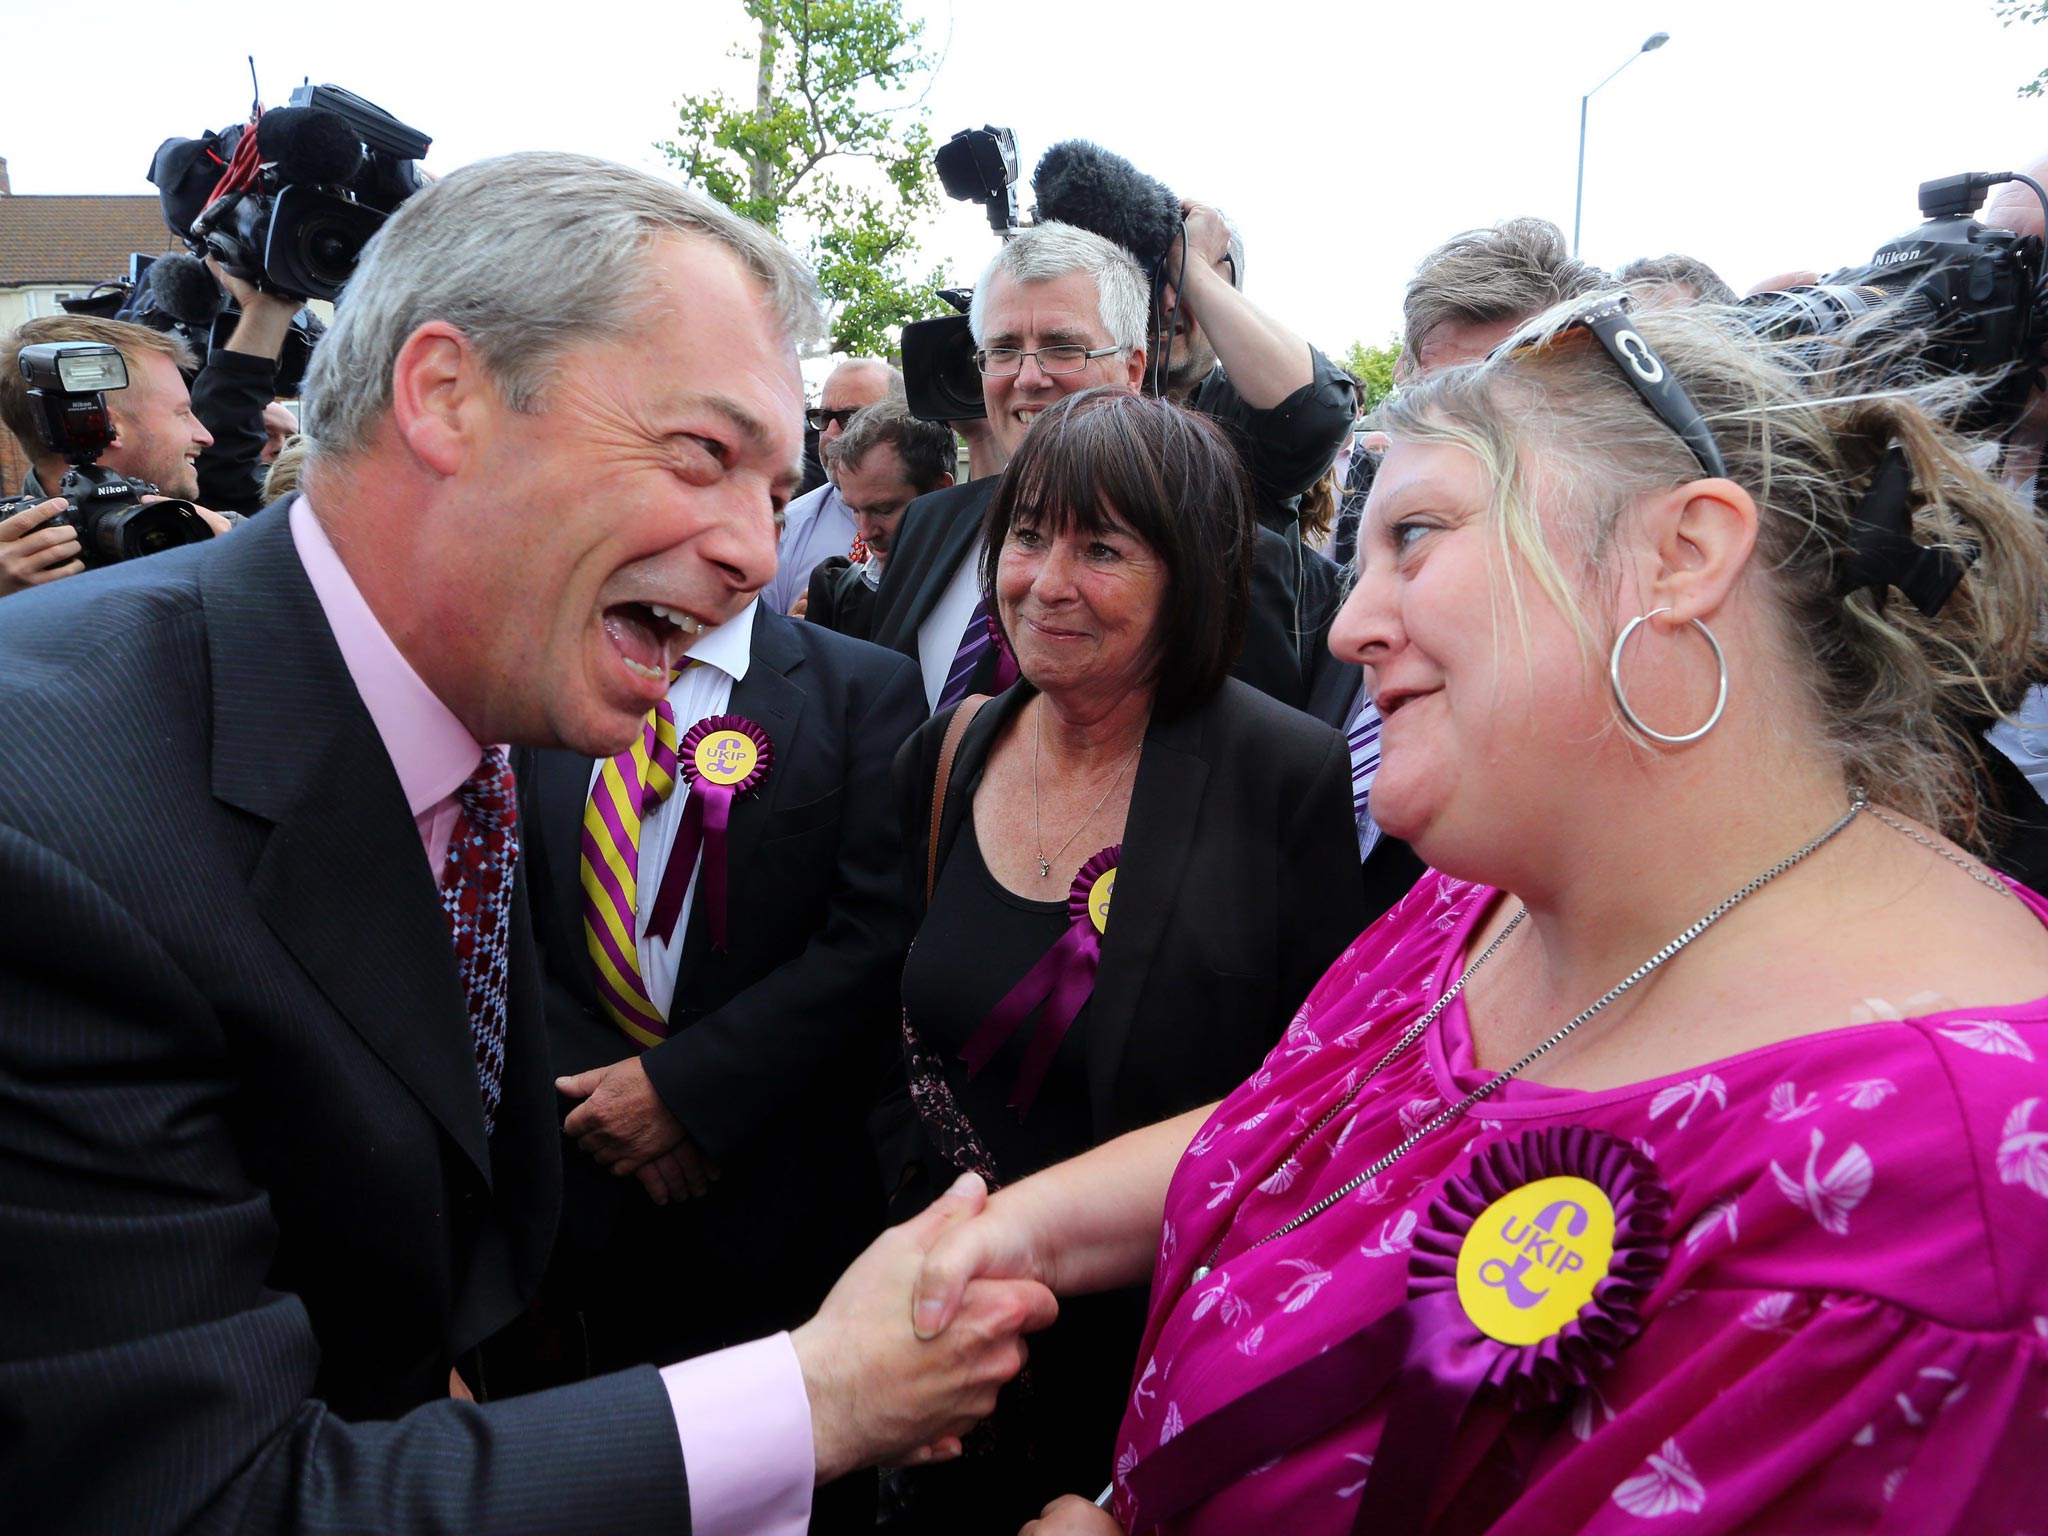 Nigel Farage in Essex yesterday; Ukip gained about 150 seats in the local elections